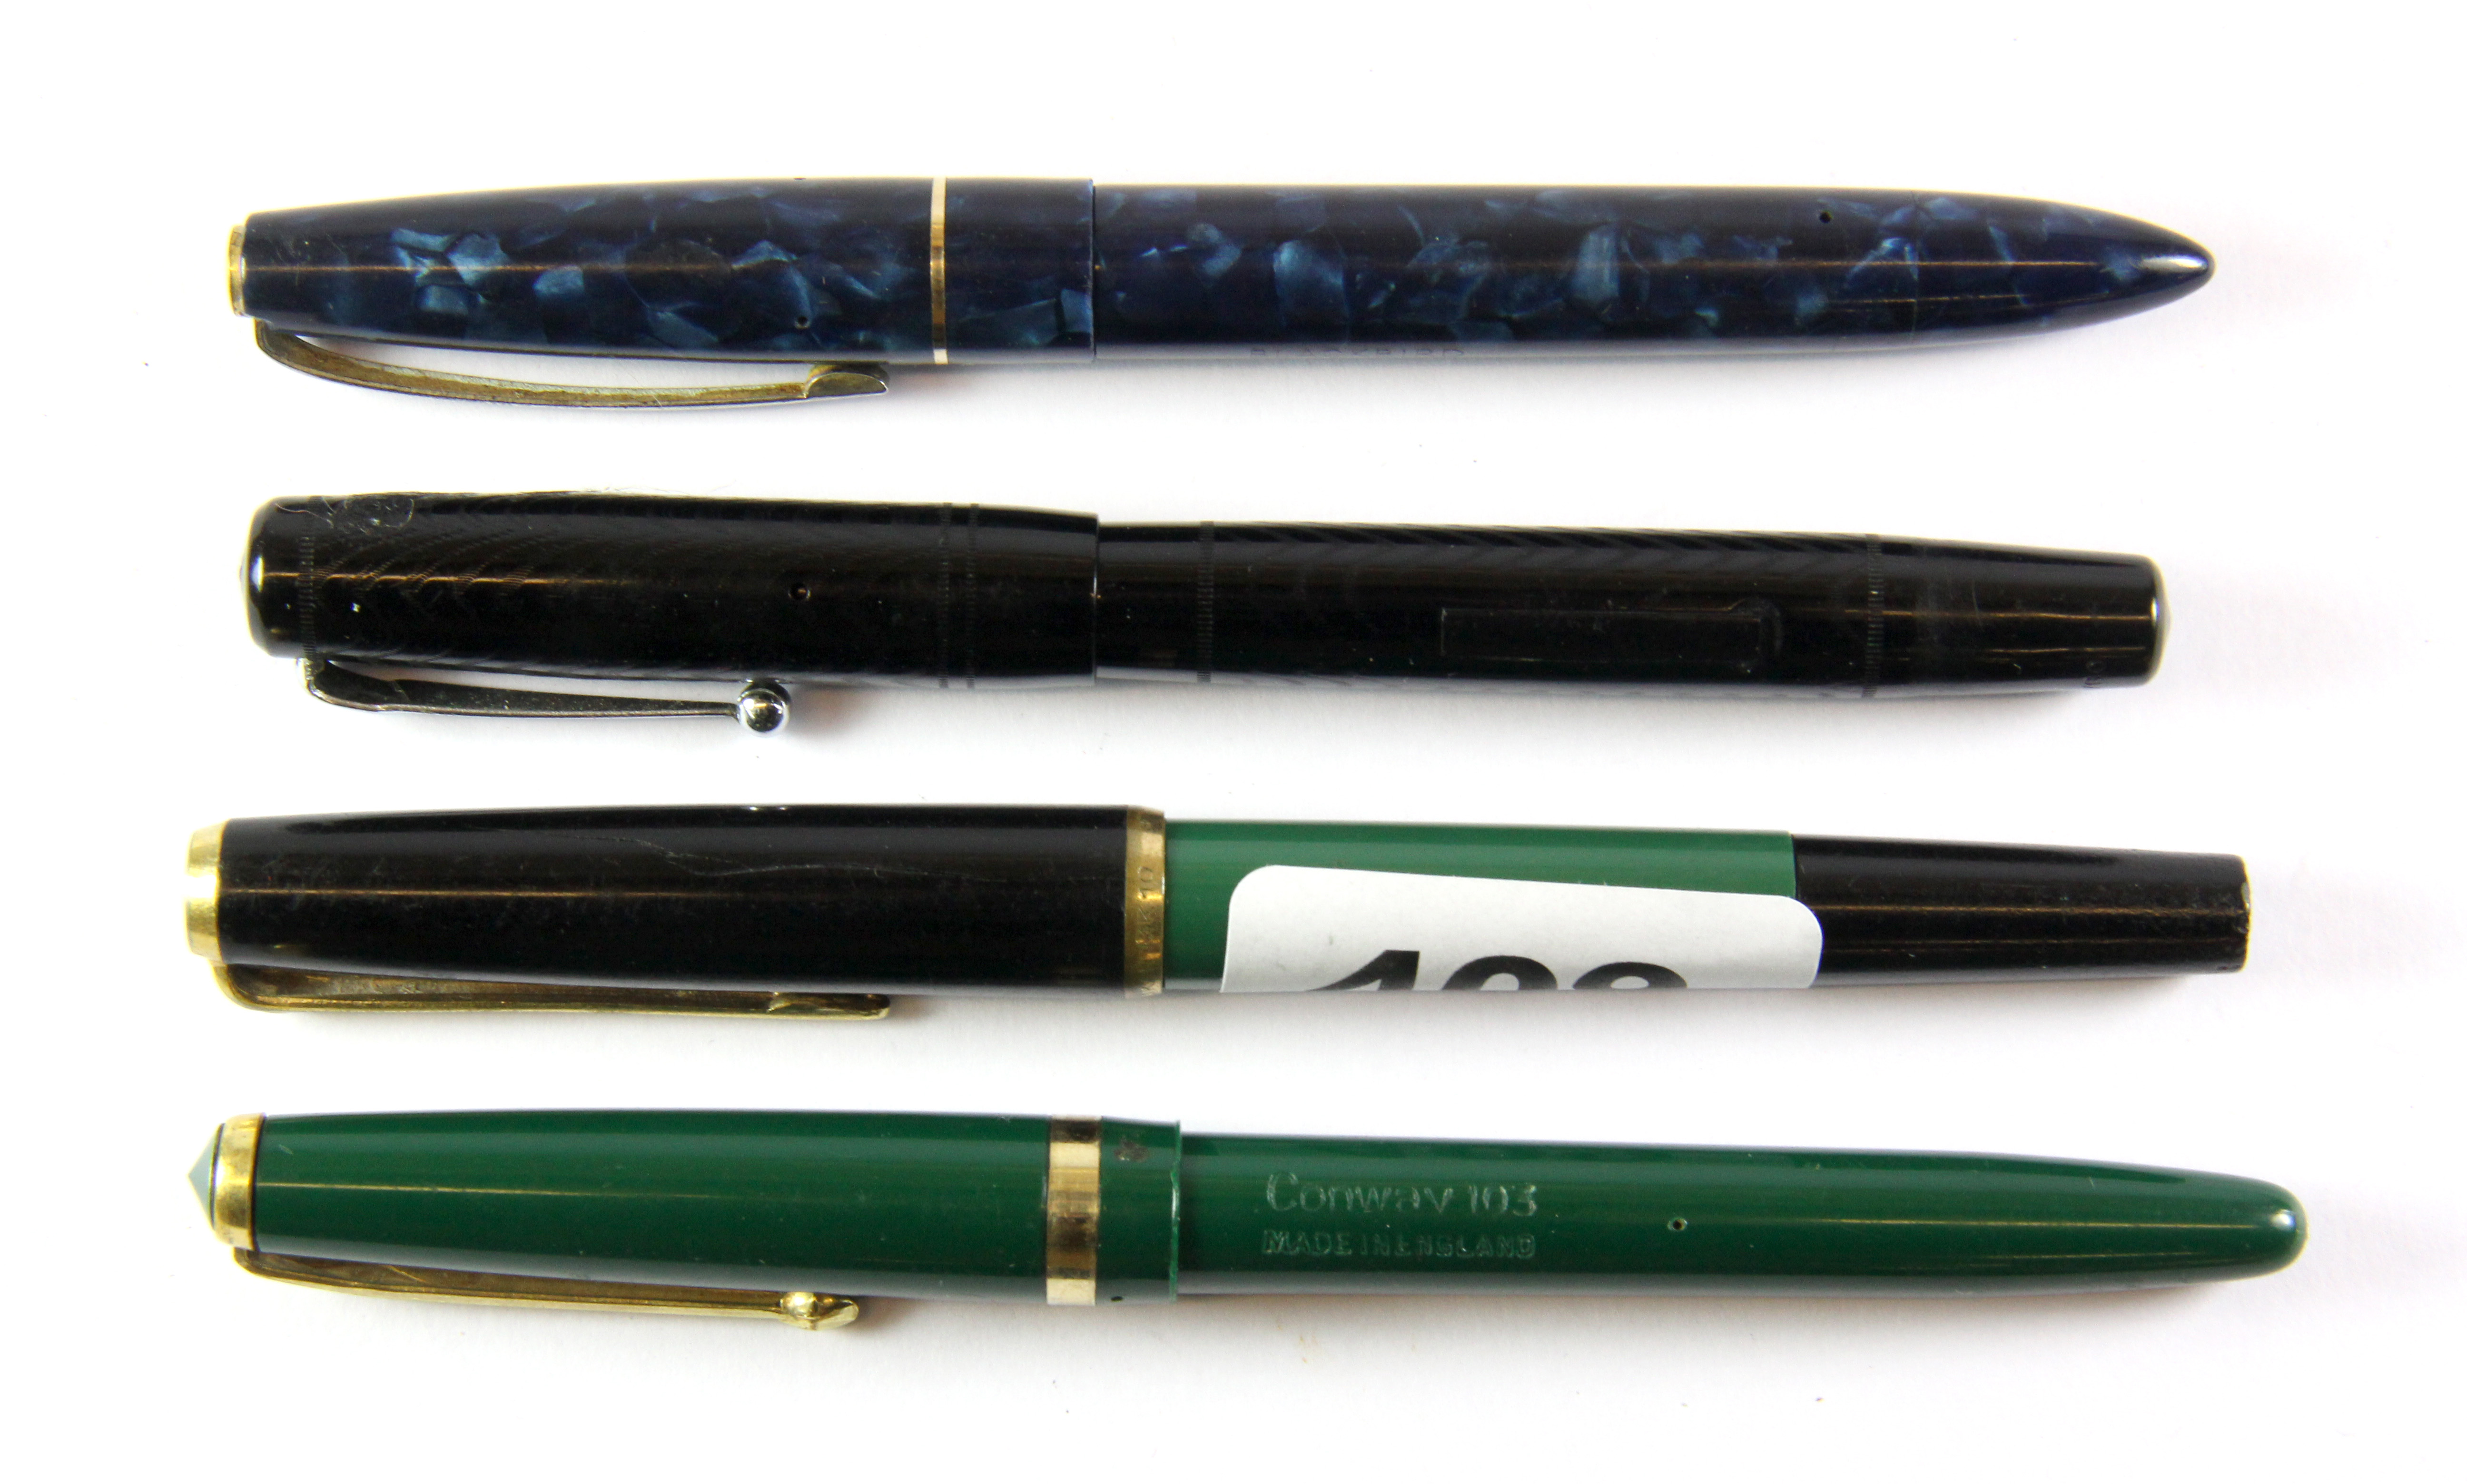 Four vintage fountain pens, all with gold nibs.